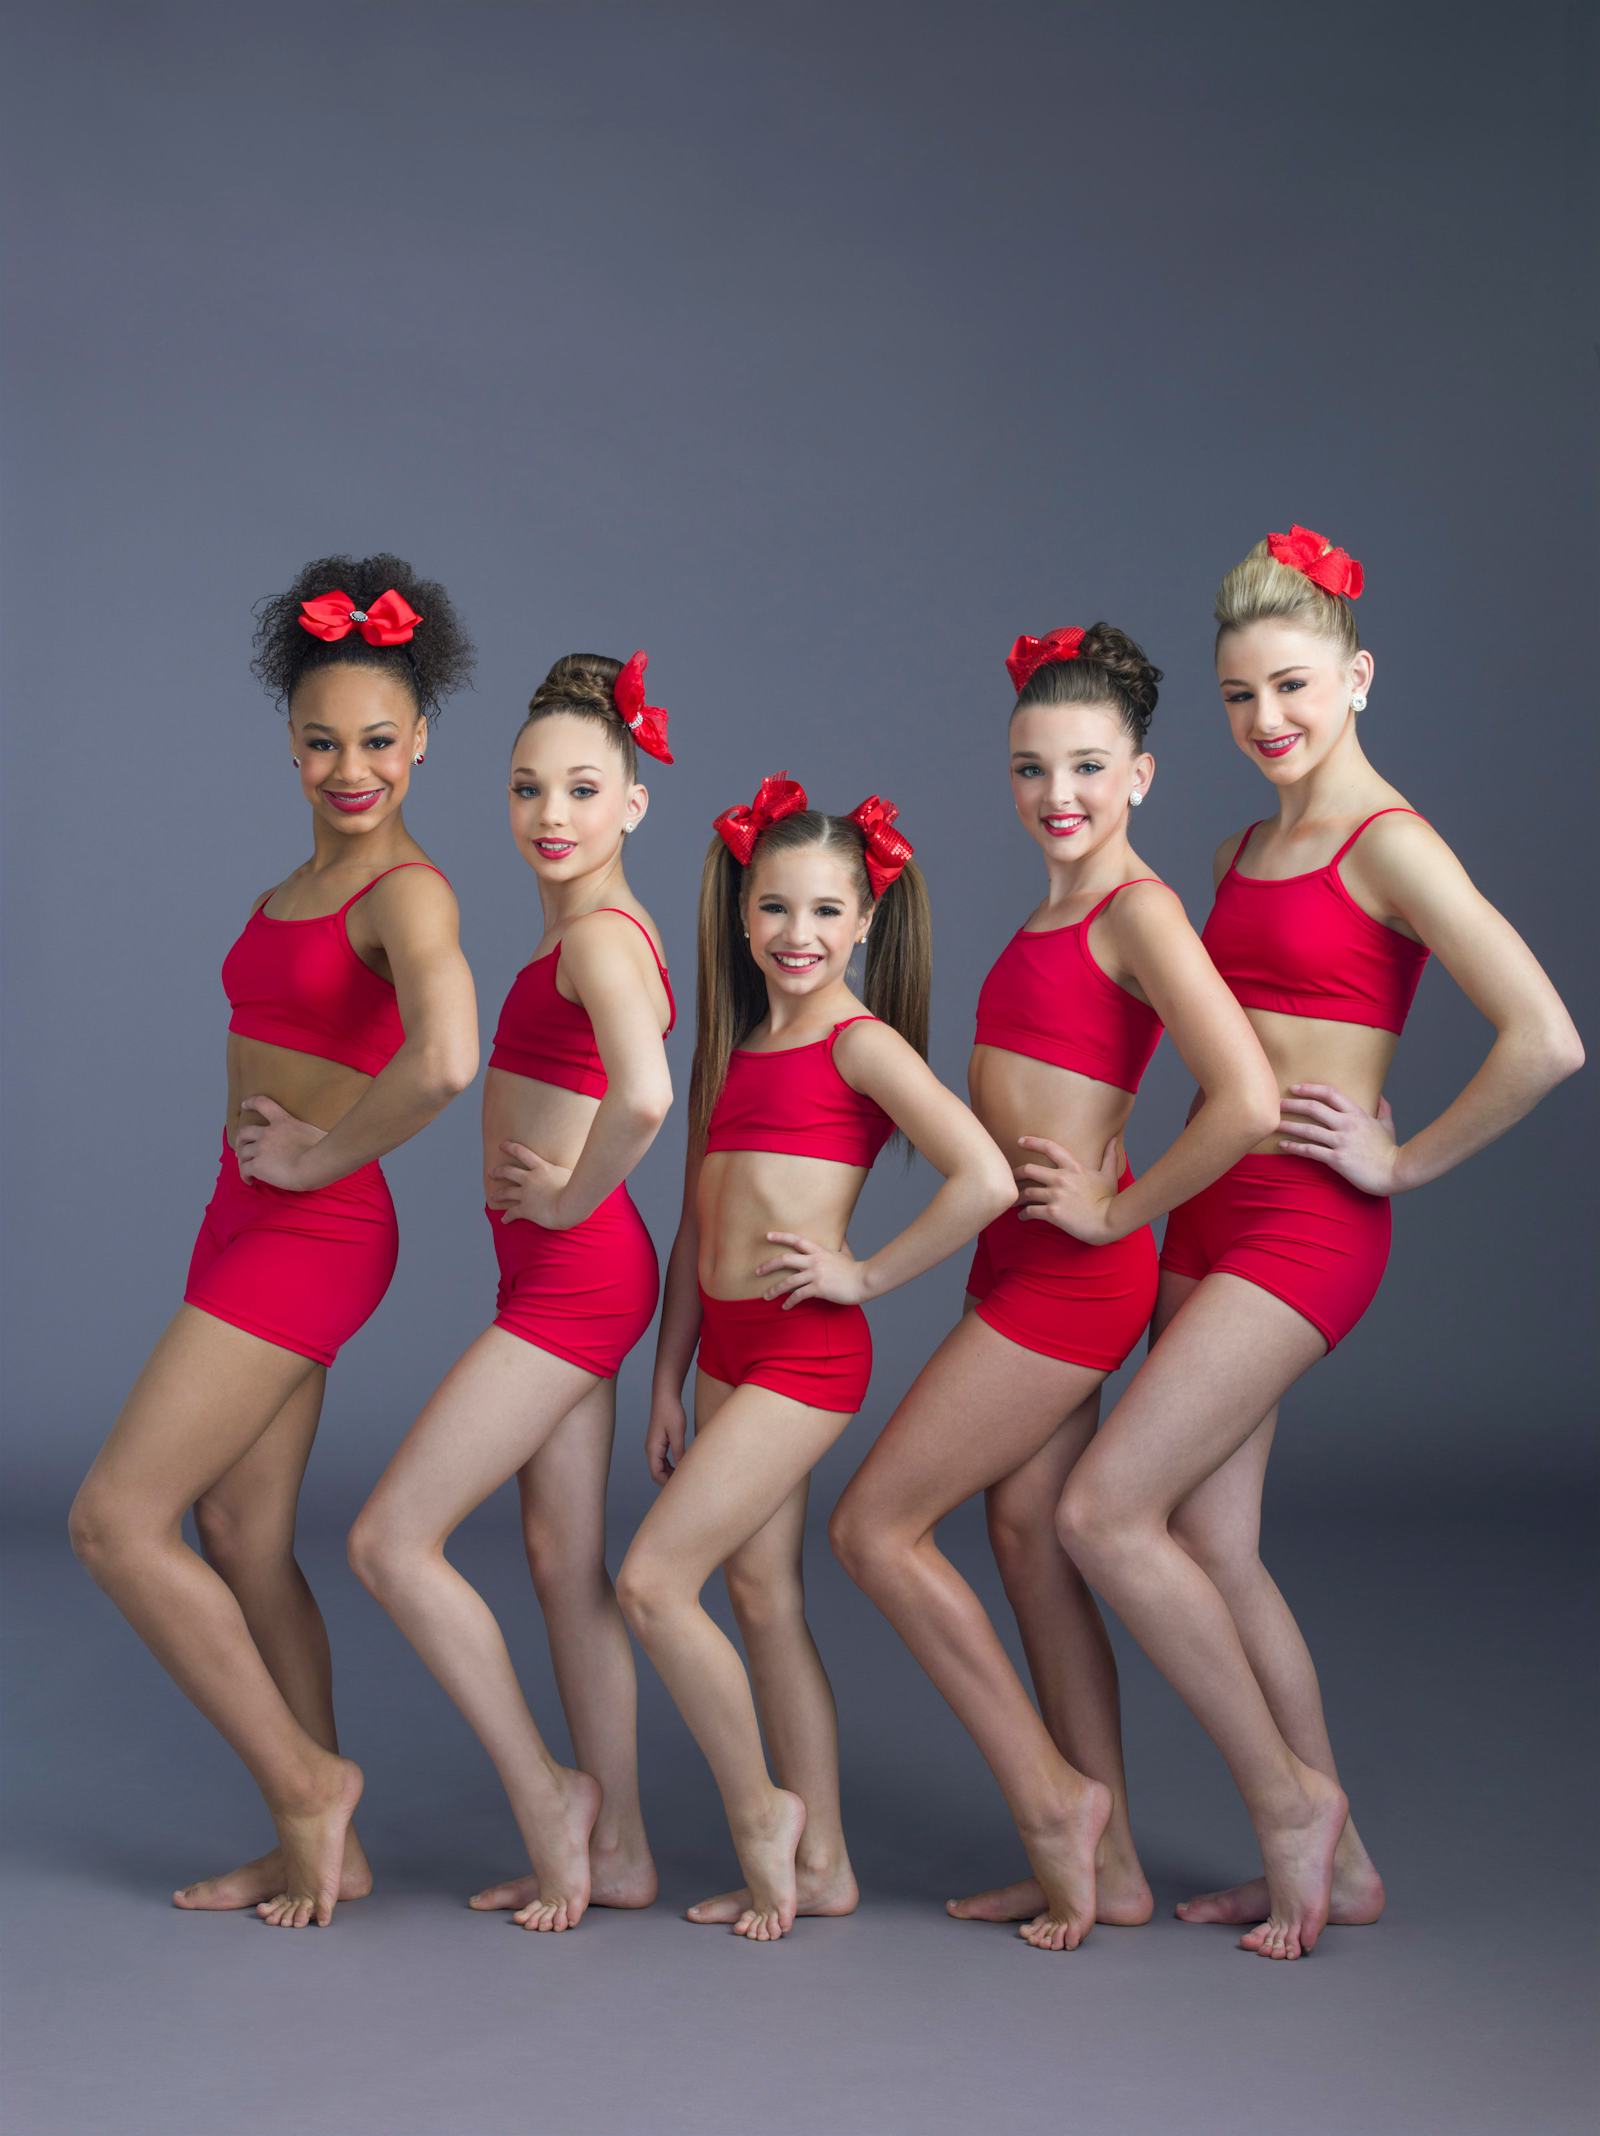 What Else Are the 'Dance Moms' Girls Doing? 